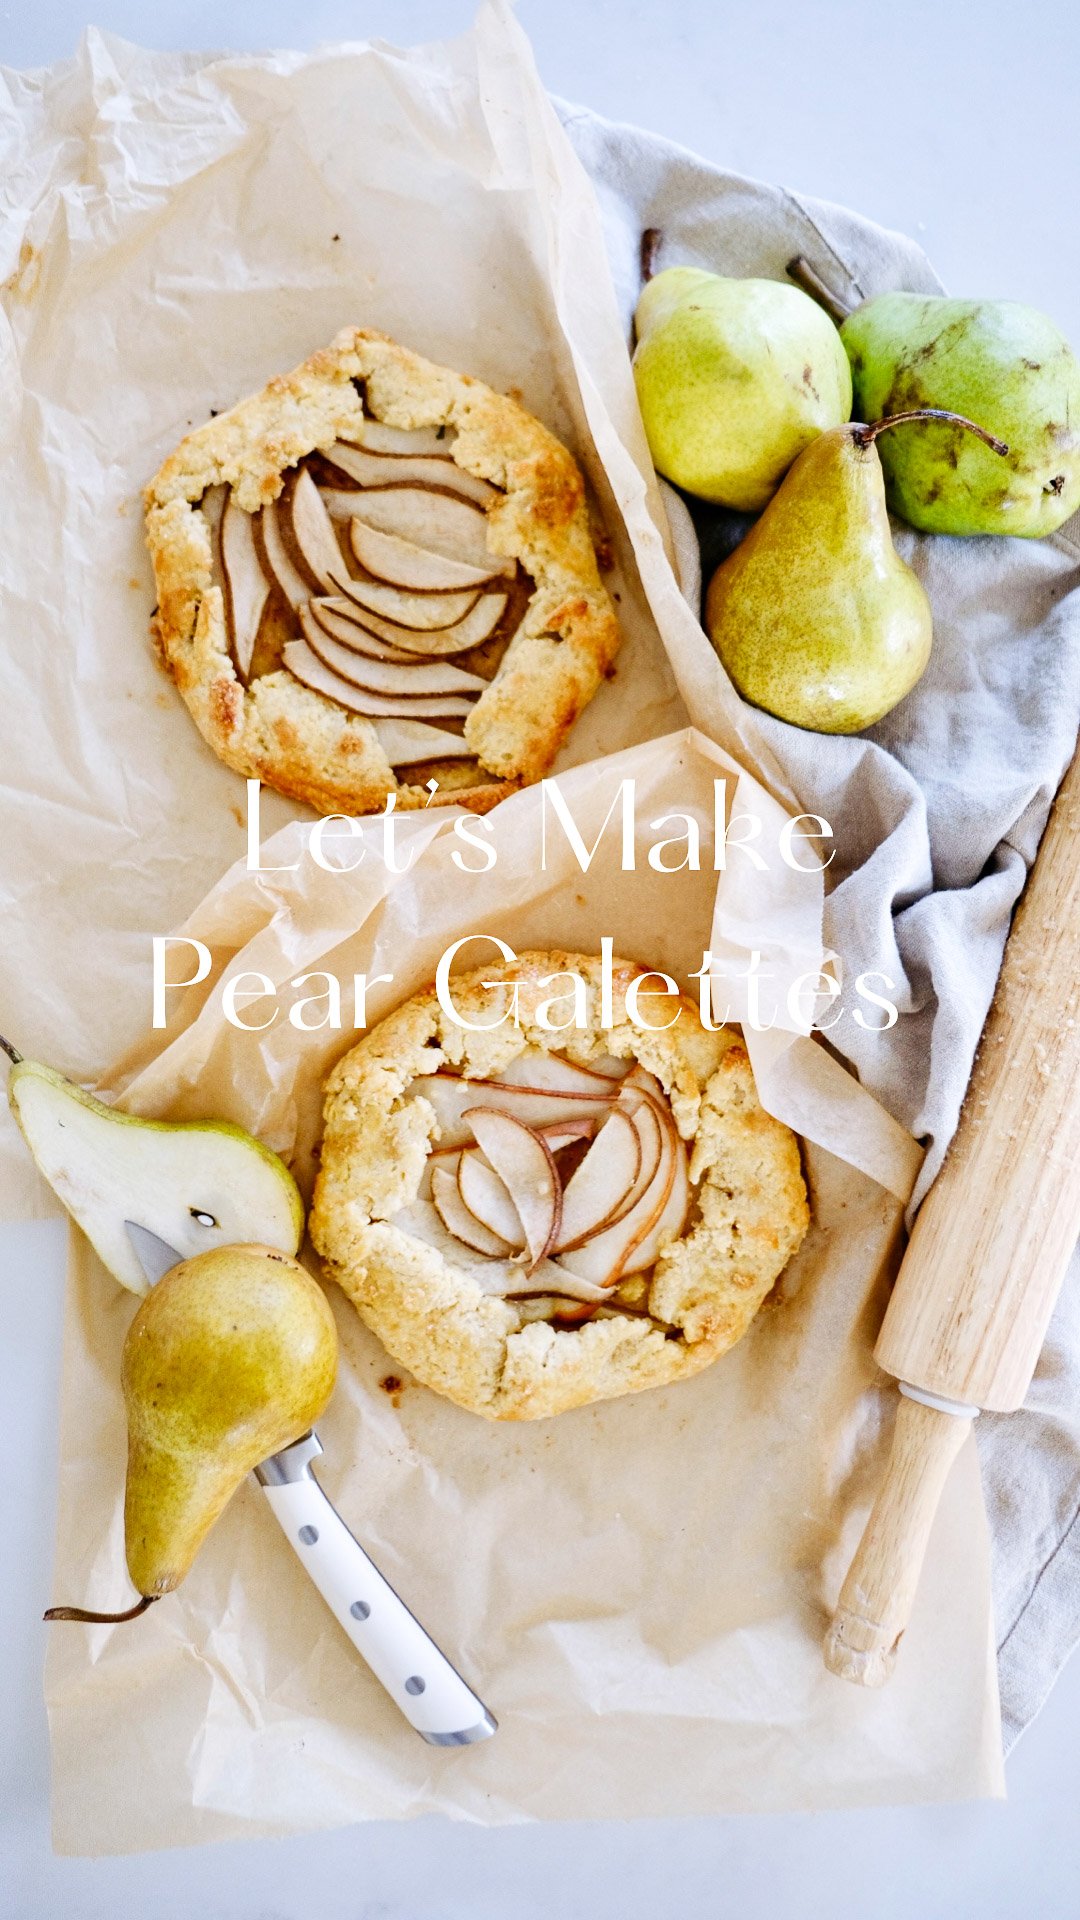 Spiced Pear Galette Recipe with Graphic Label written on the image.